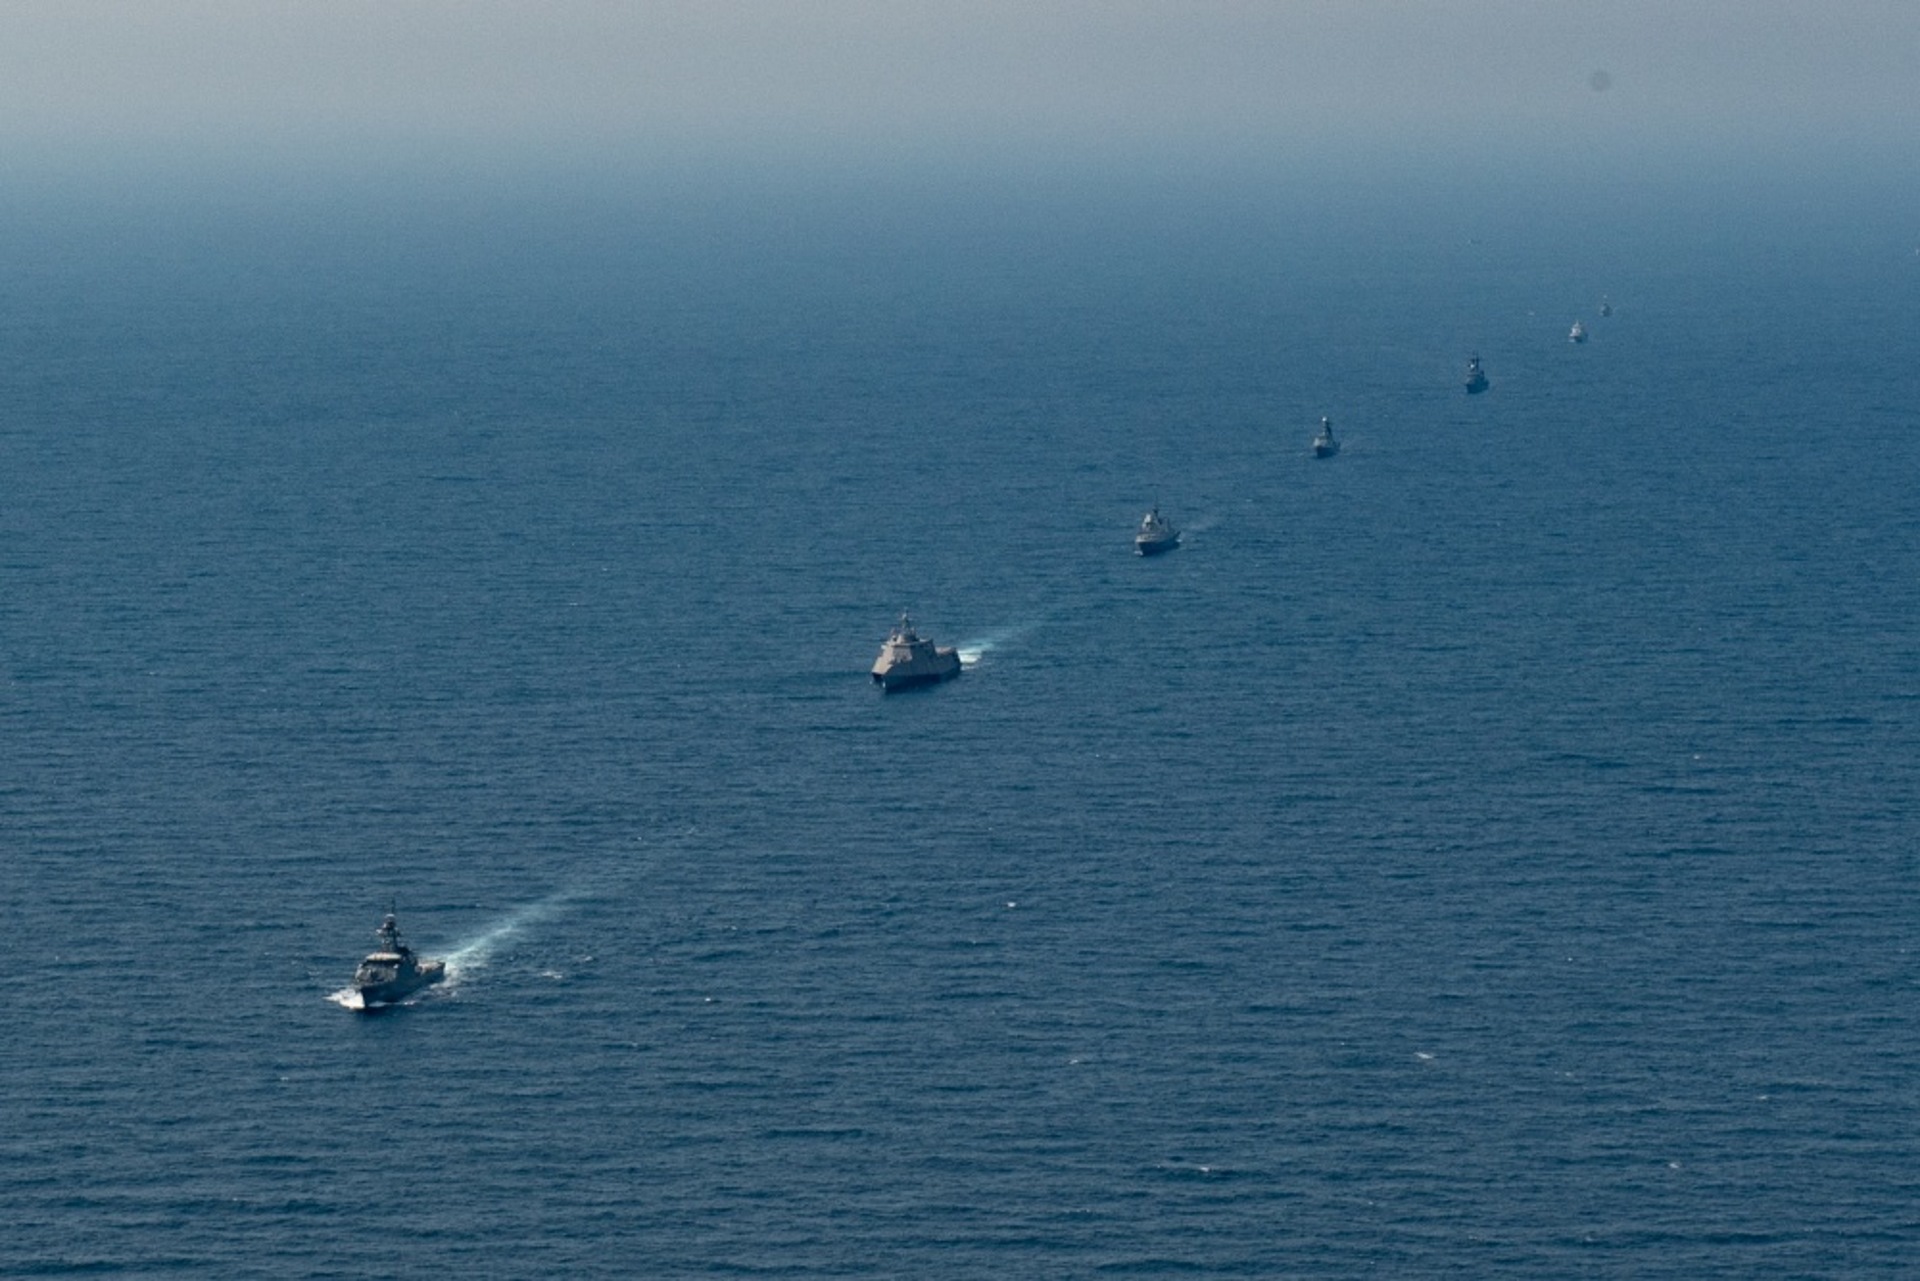 Ships from the participating navies sailing in formation during the AUMX.